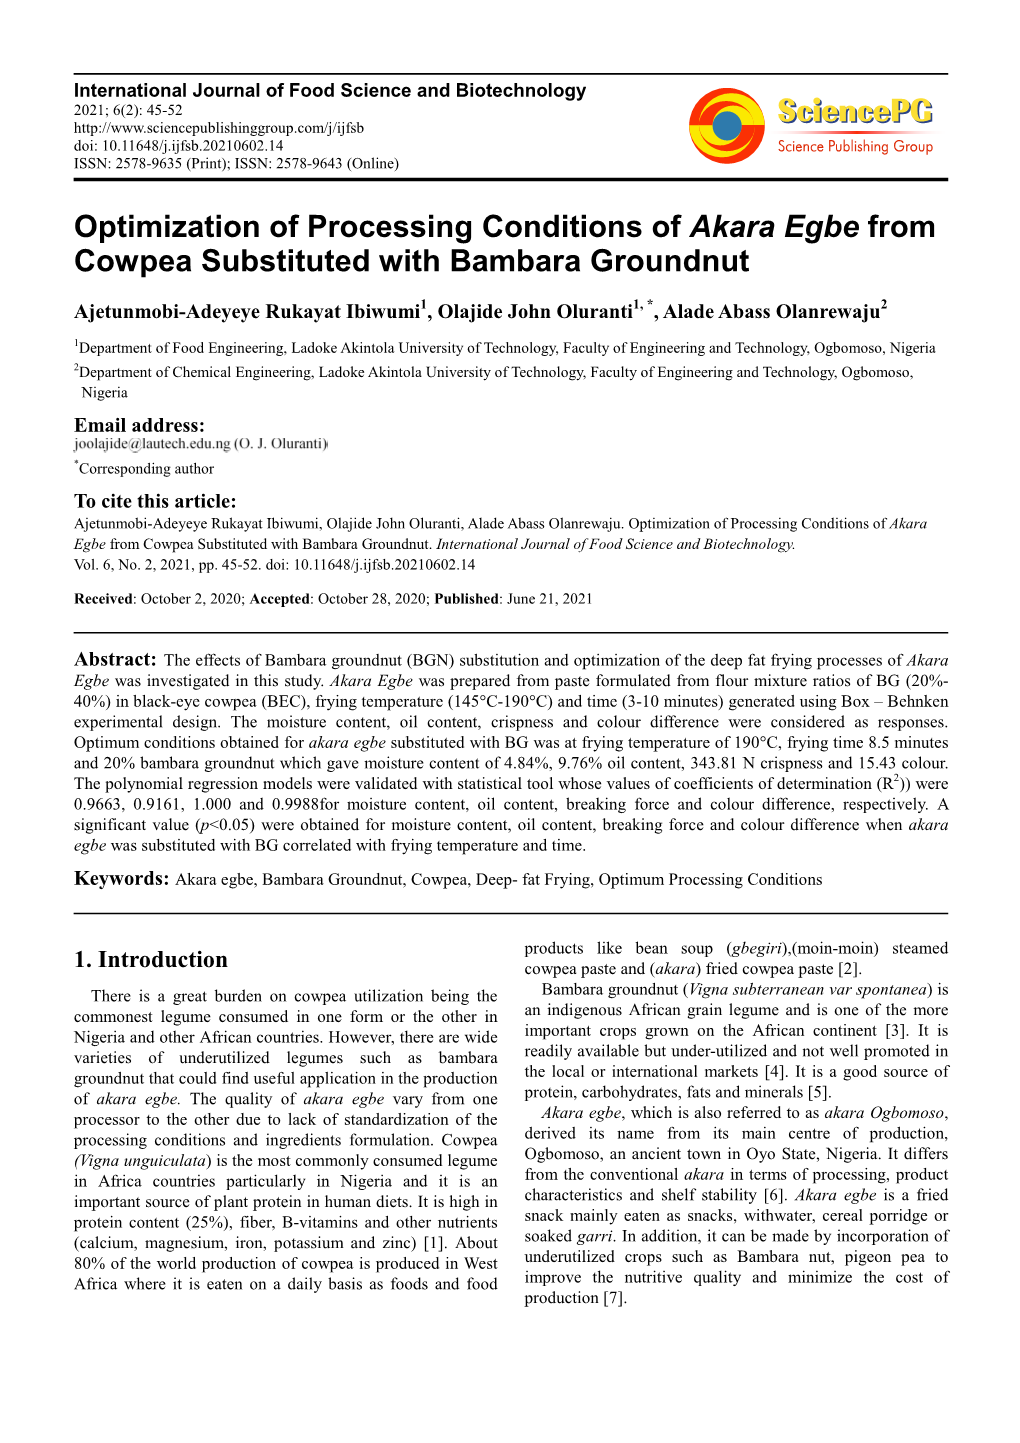 Optimization of Processing Conditions of Akara Egbe from Cowpea Substituted with Bambara Groundnut